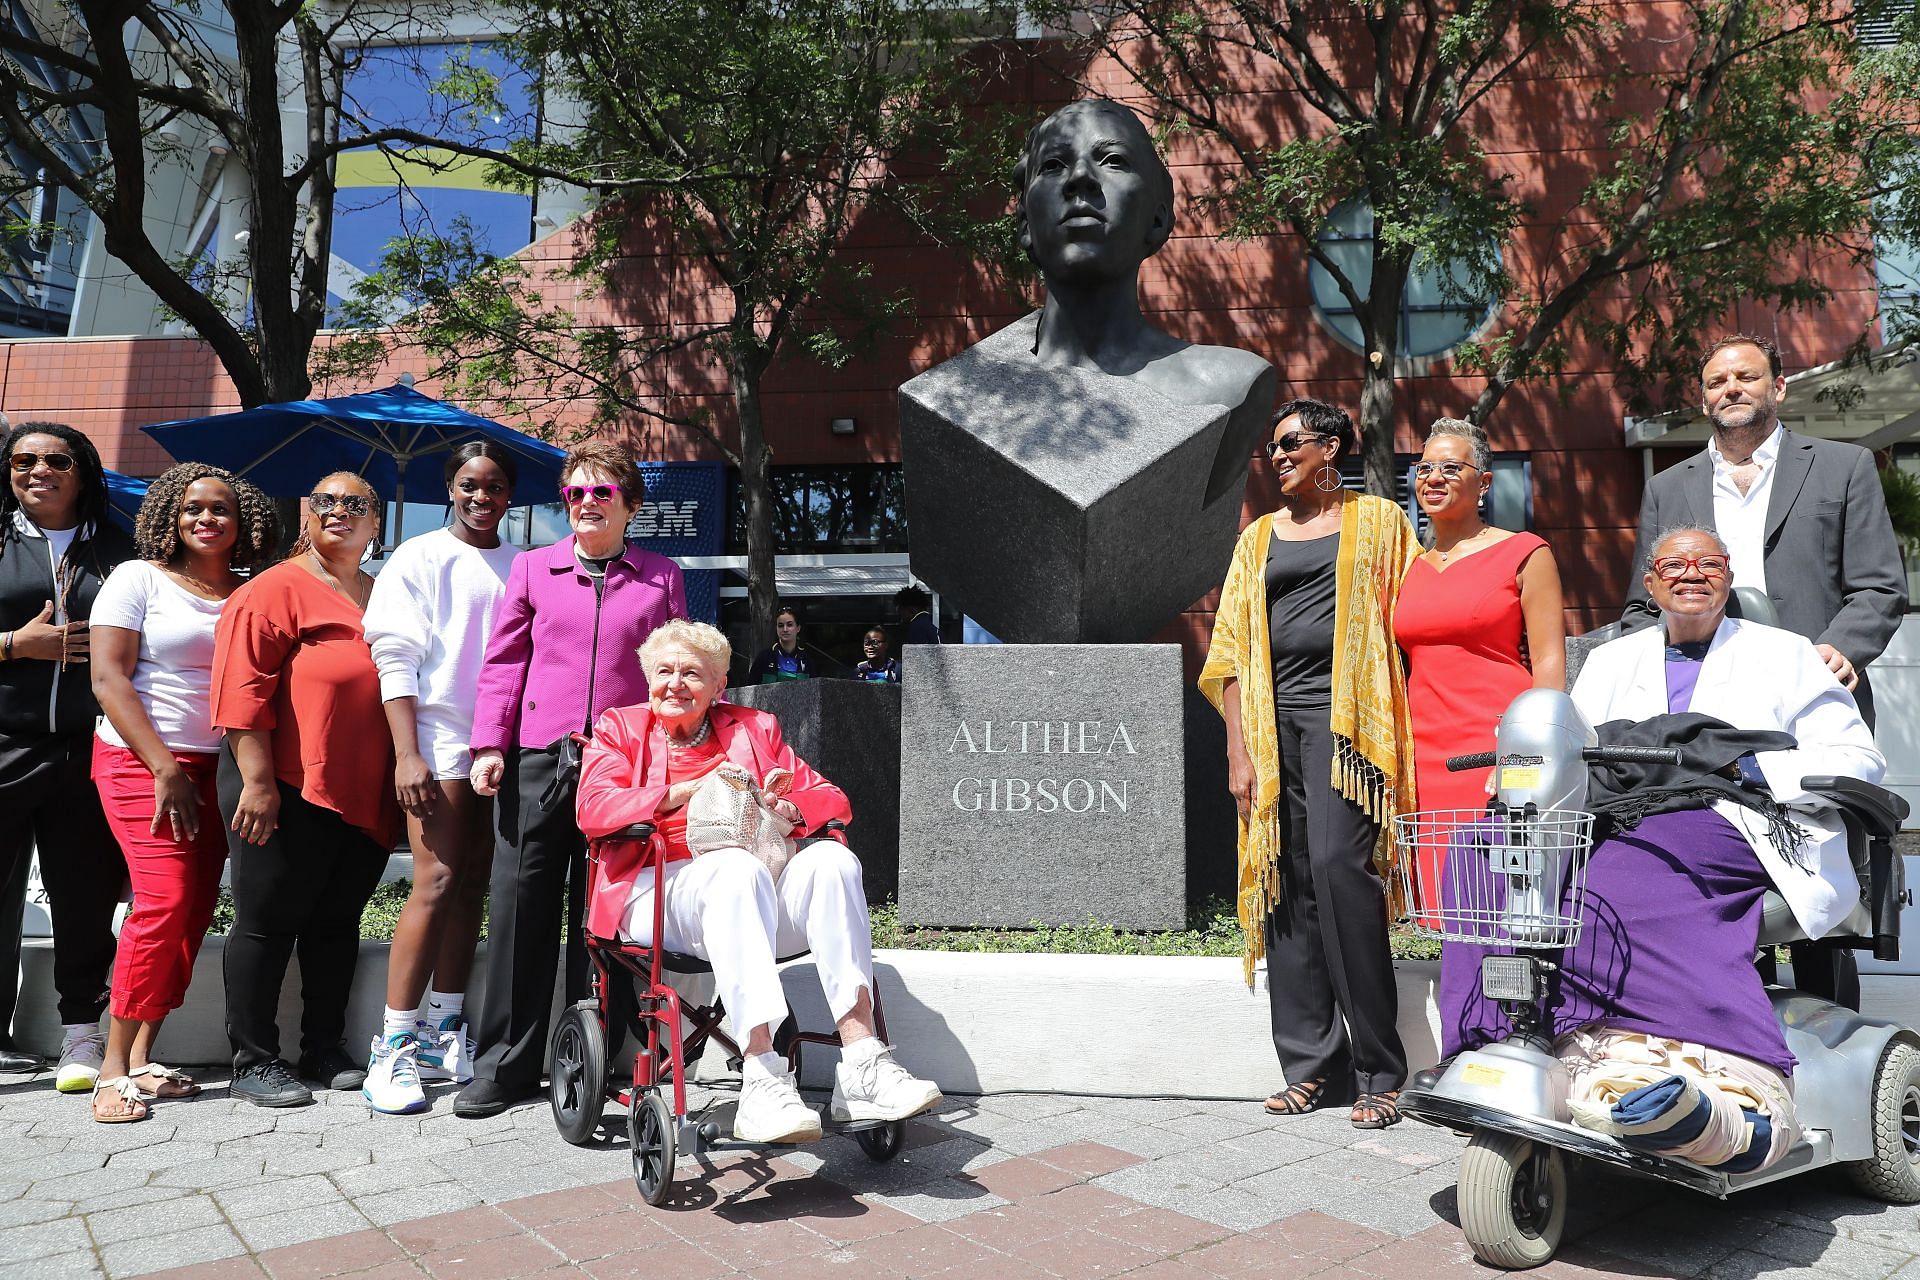 The Althea Gibson statue unveiled in Flushing Meadows